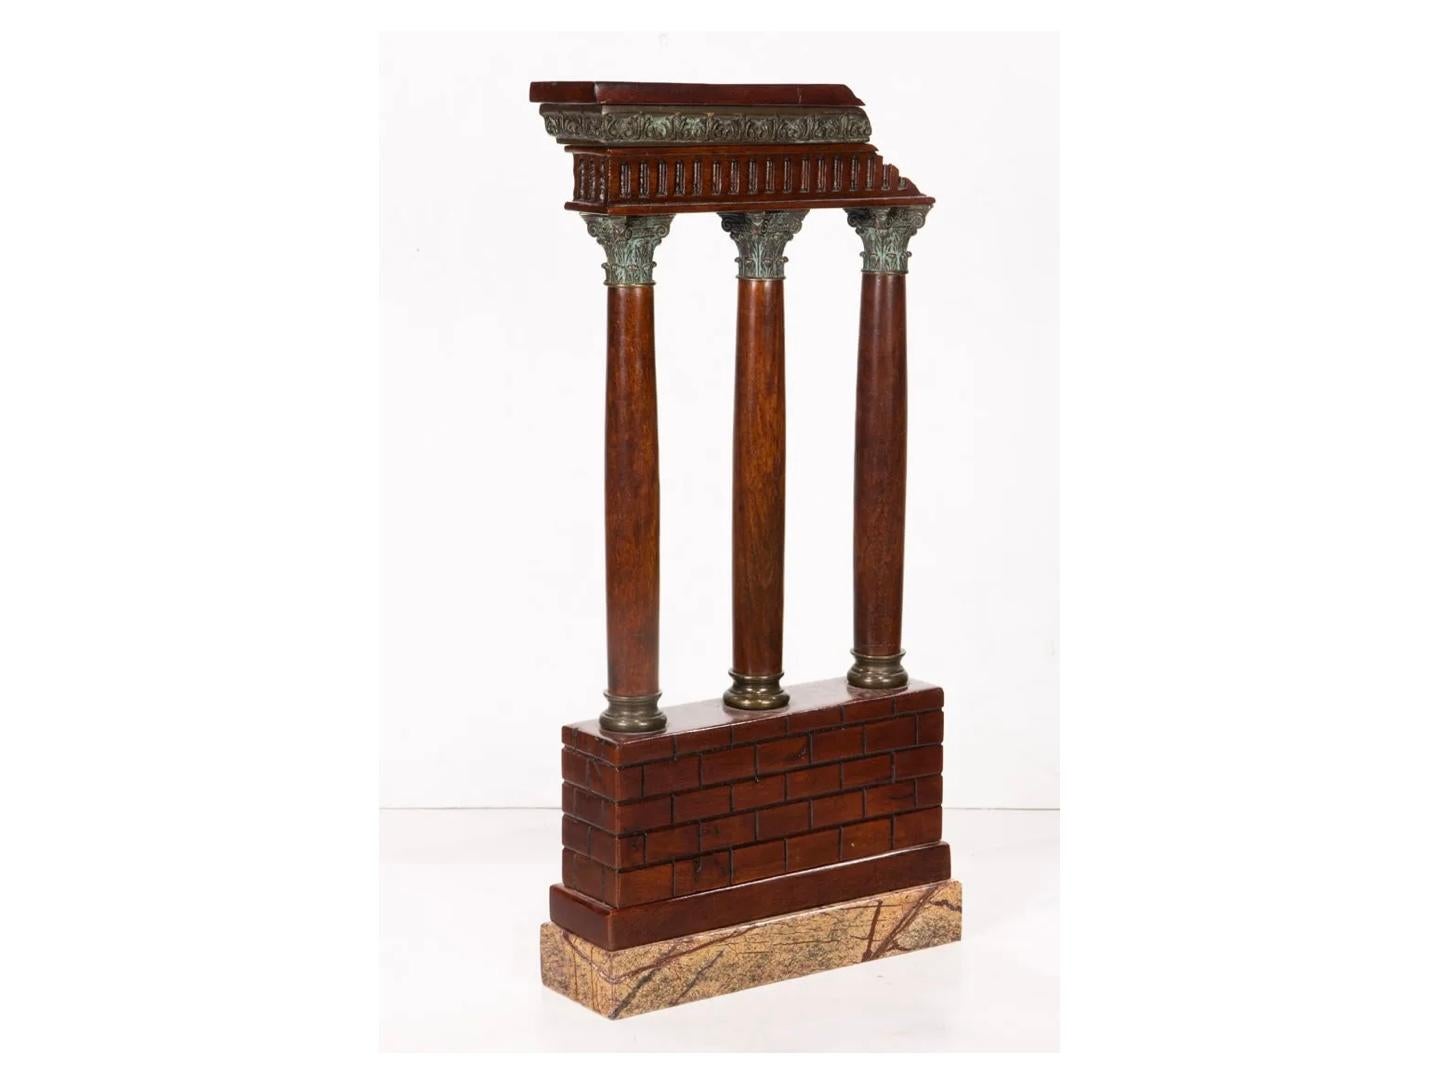 A Grand Tour bronze mounted mahogany and marble model of Roman Ruins, 20th century. This is a rare and exceptionally made model of the Grand Tour period as it is made from carved mahogany and bronze capitals resting upon a marble base. Very nice